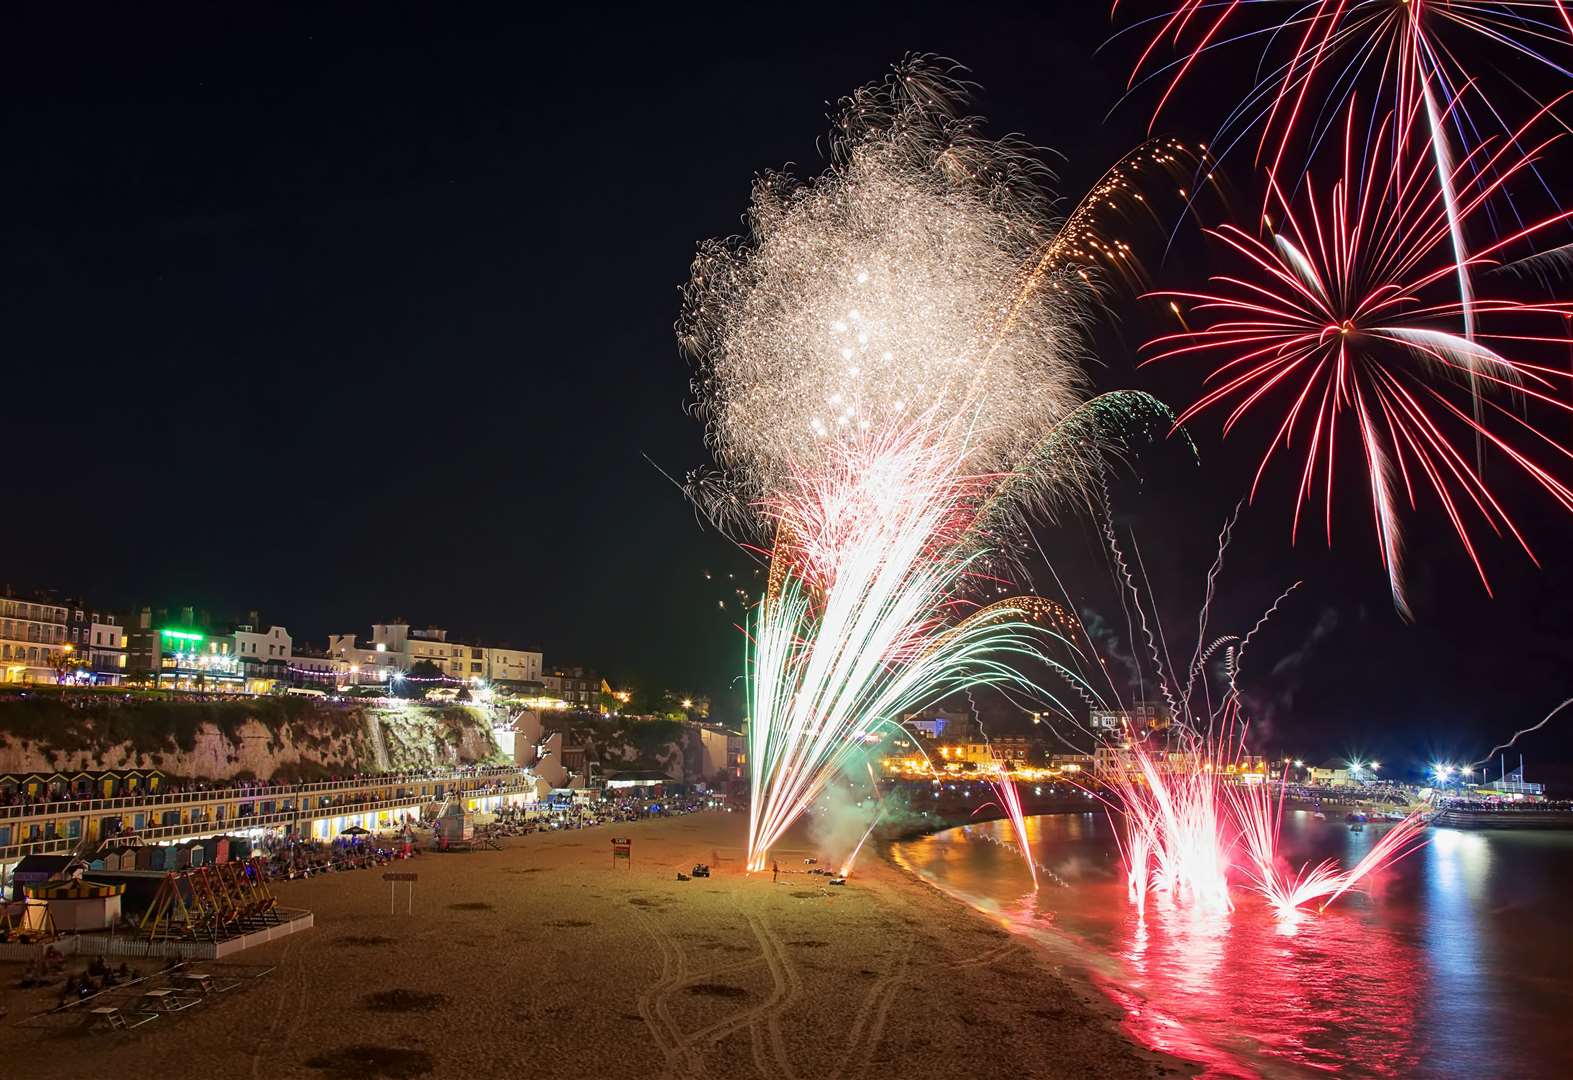 Terry Vick of Cliftonville took this shot at one of the Broadstairs fireworks displays in 2018